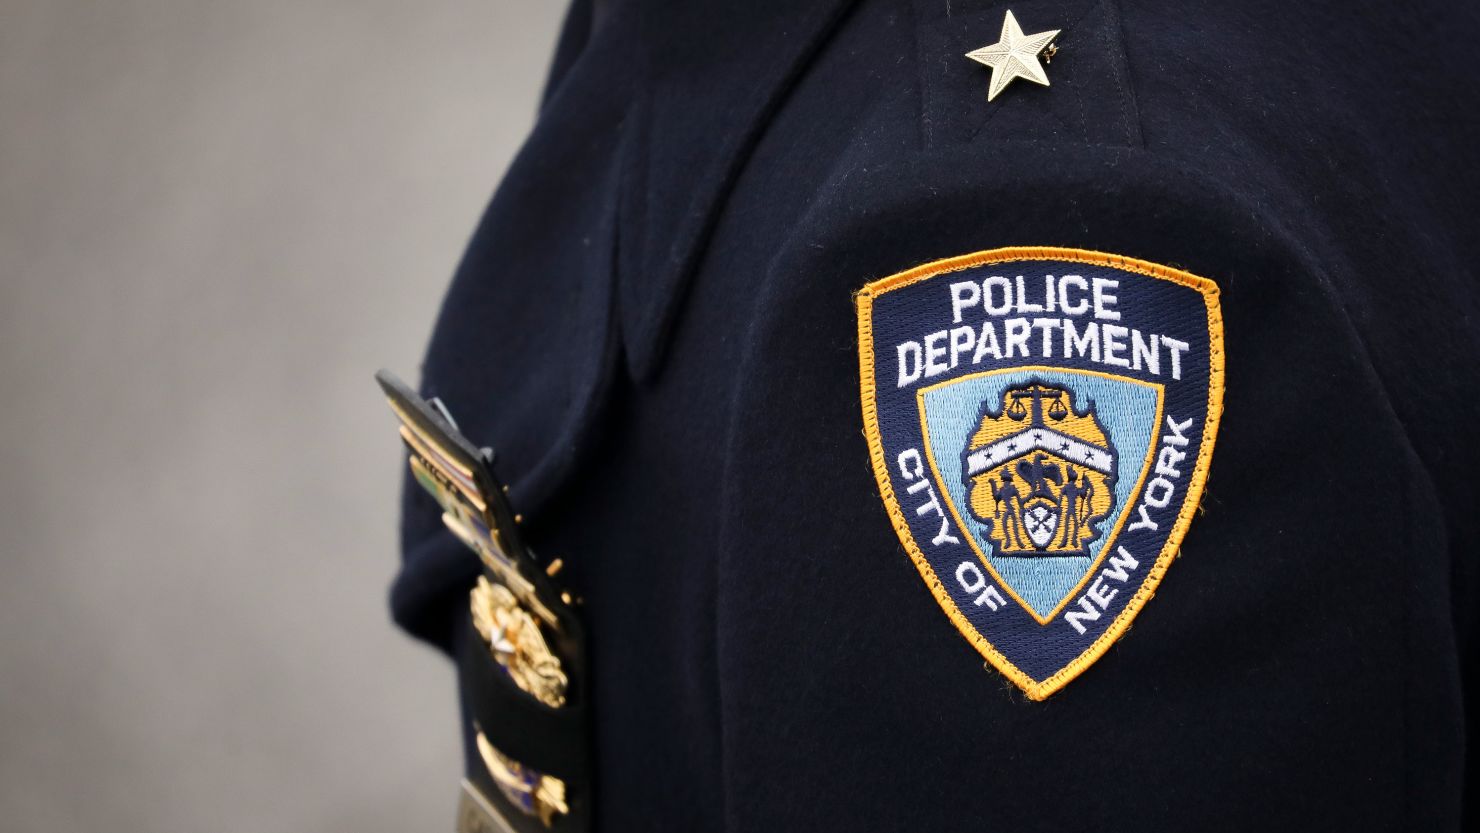 The Legal Aid Society's lawsuit argues the NYPD's practice of secretly collecting DNA from suspects without a warrant or court order is unconstitutional.